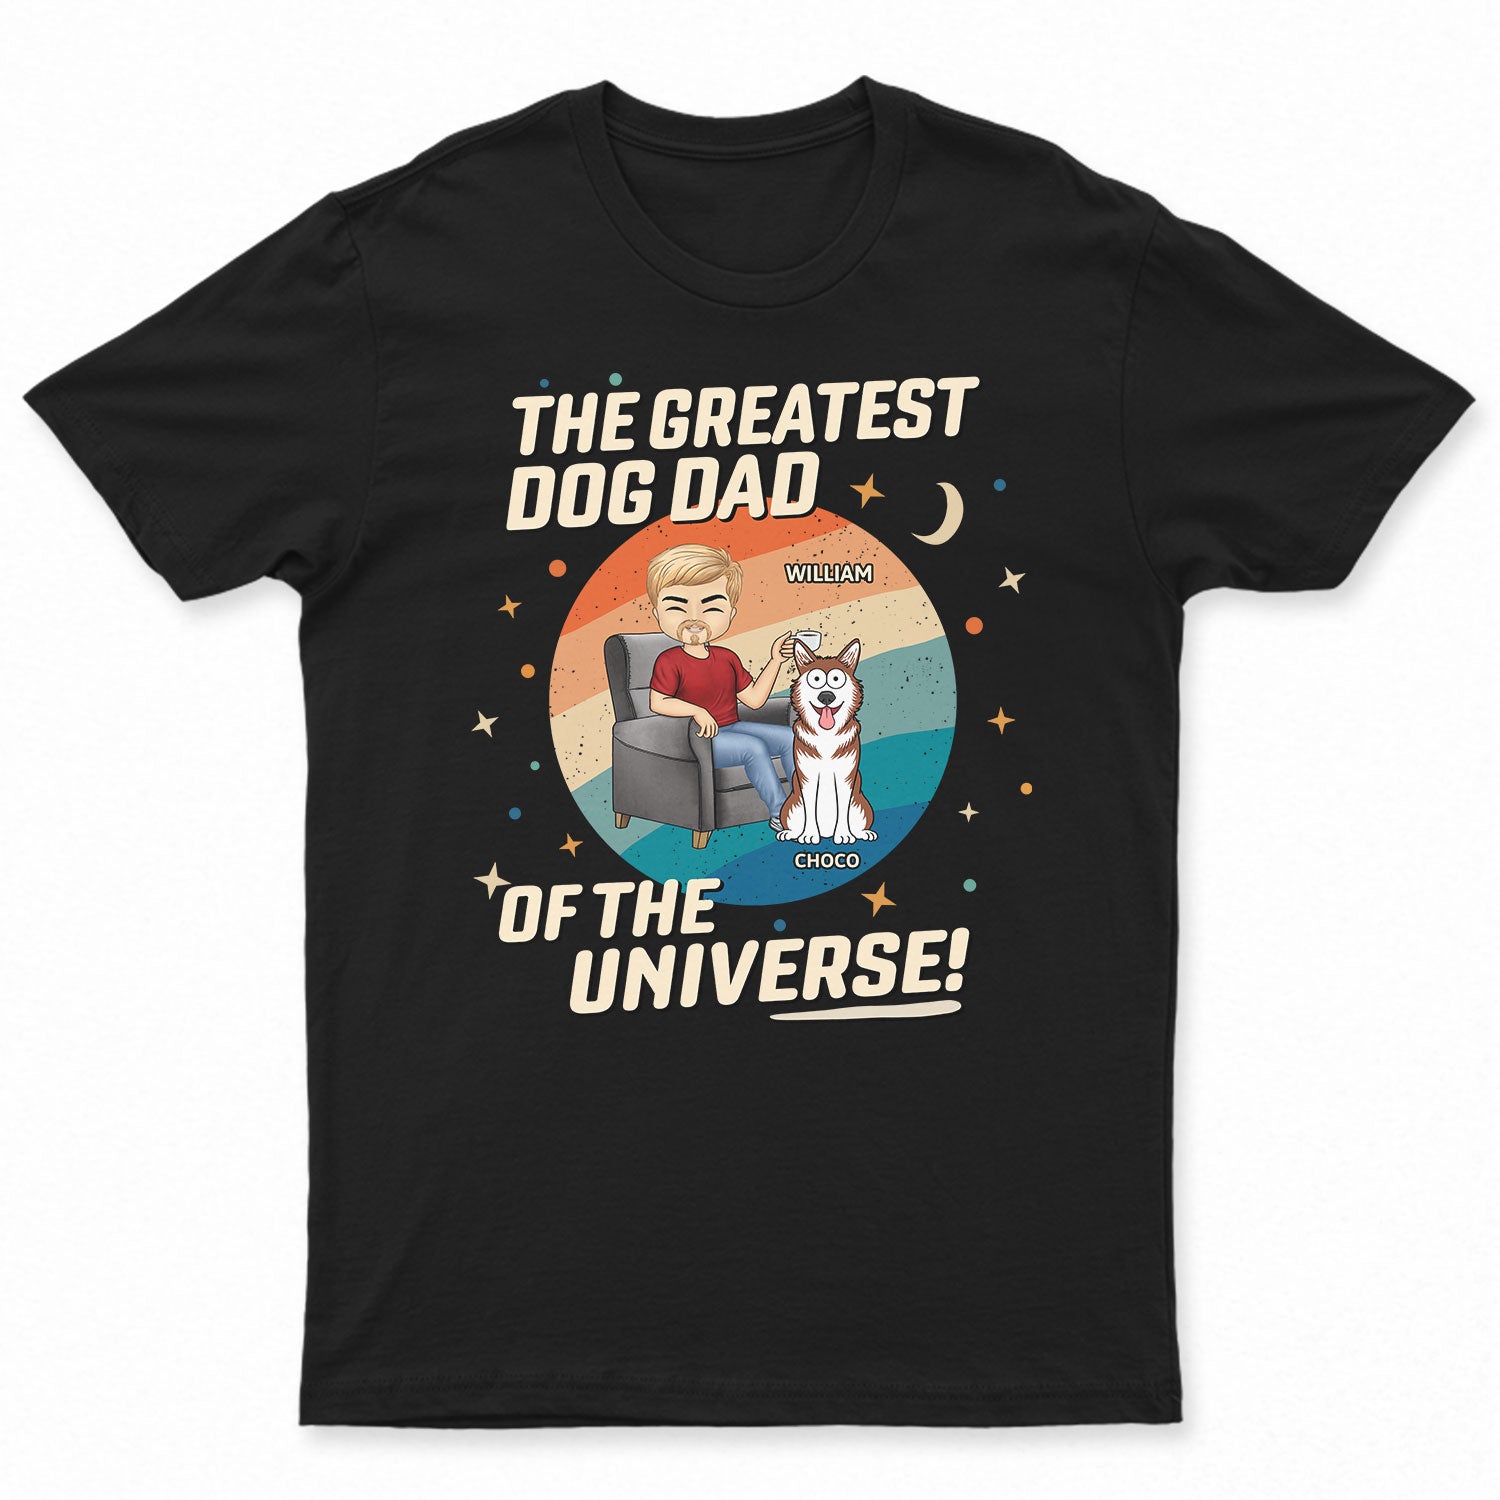 The Greatest Dog Dad Of The Universe - Gift For Dog Lovers - Personalized T Shirt